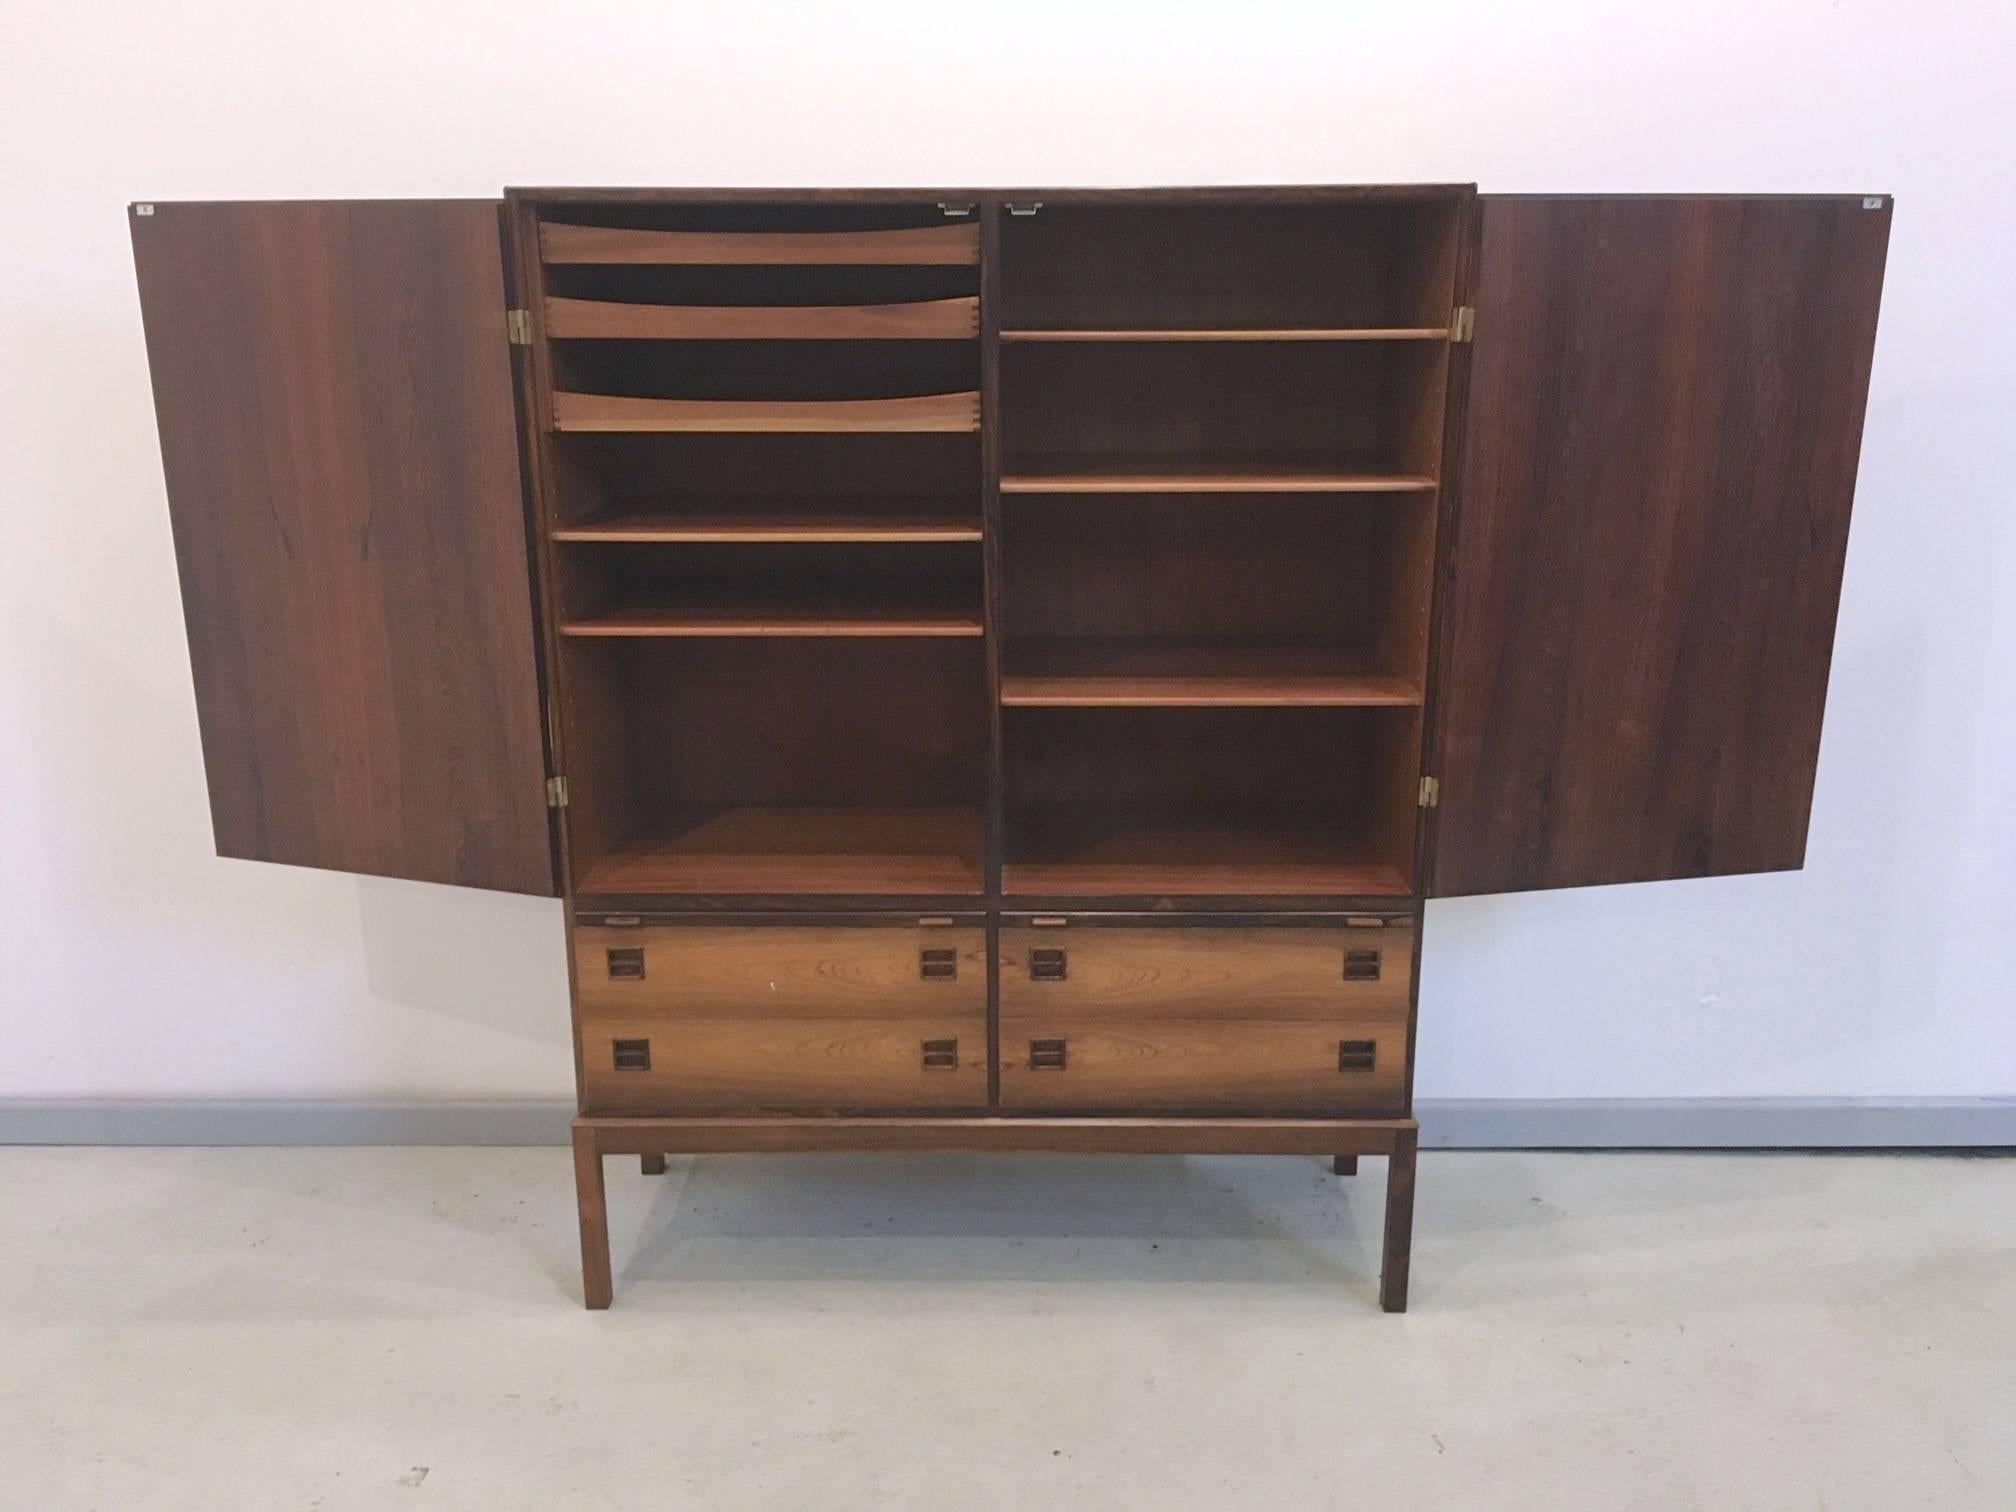 Gorgeous Mid-Century Modern chest with rosewood grain. Two-door top cabinet with shelves and drawers, four bottom drawers with butterfly joints and two pull-out shelves.

Item is in our New Hampshire warehouse and not available for viewing.
 